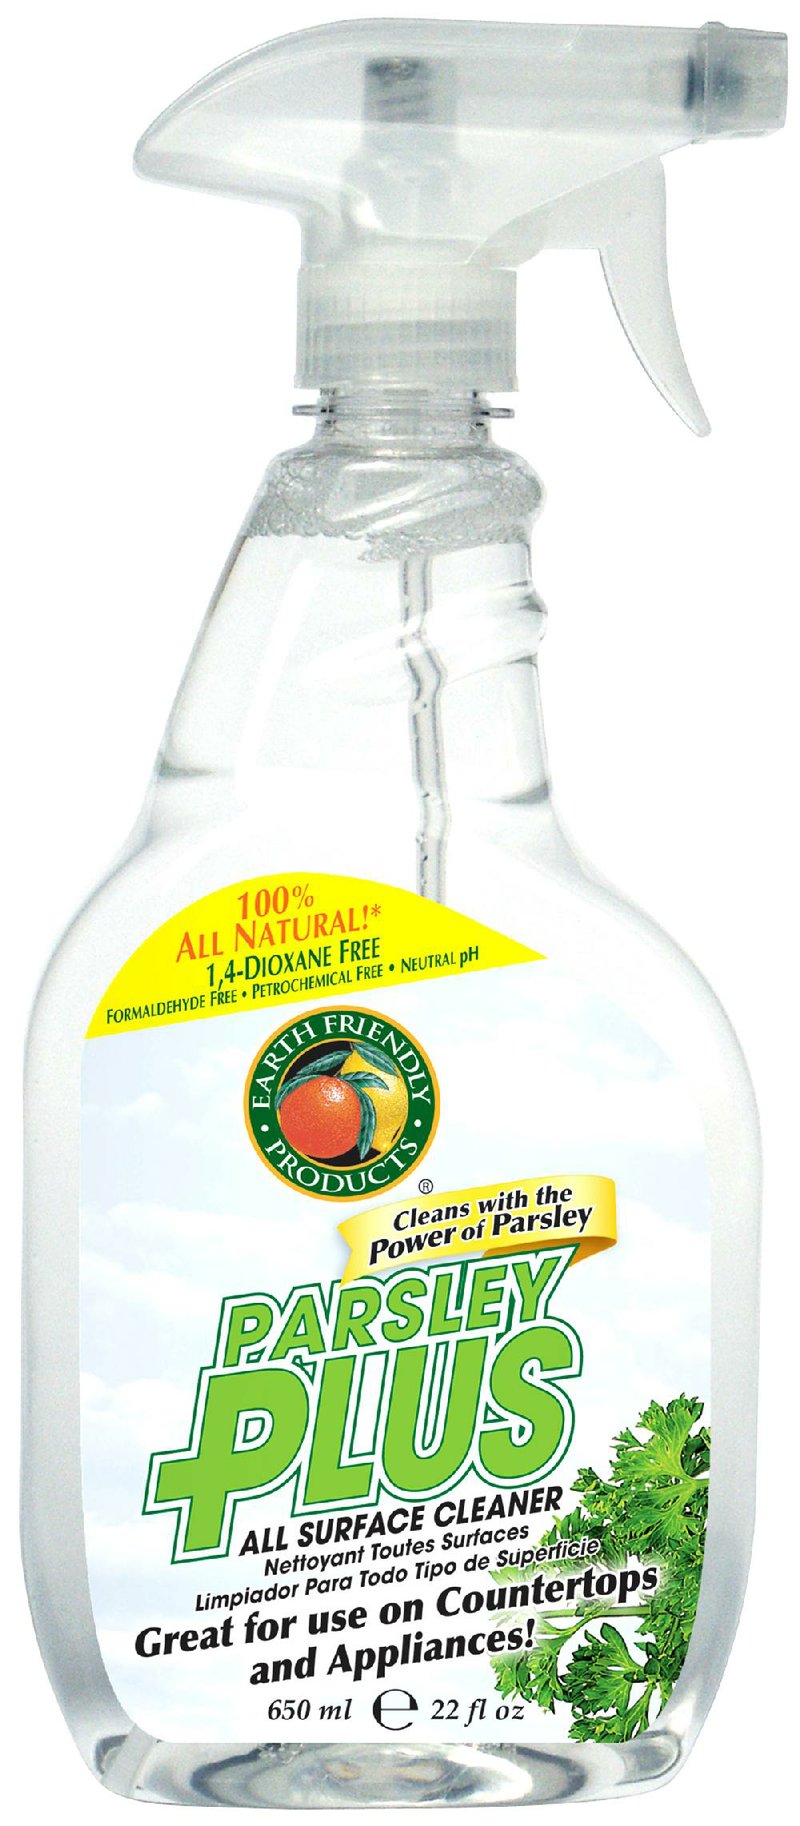 Earth Friendly Products’ Parsley Plus All Surface Cleaner